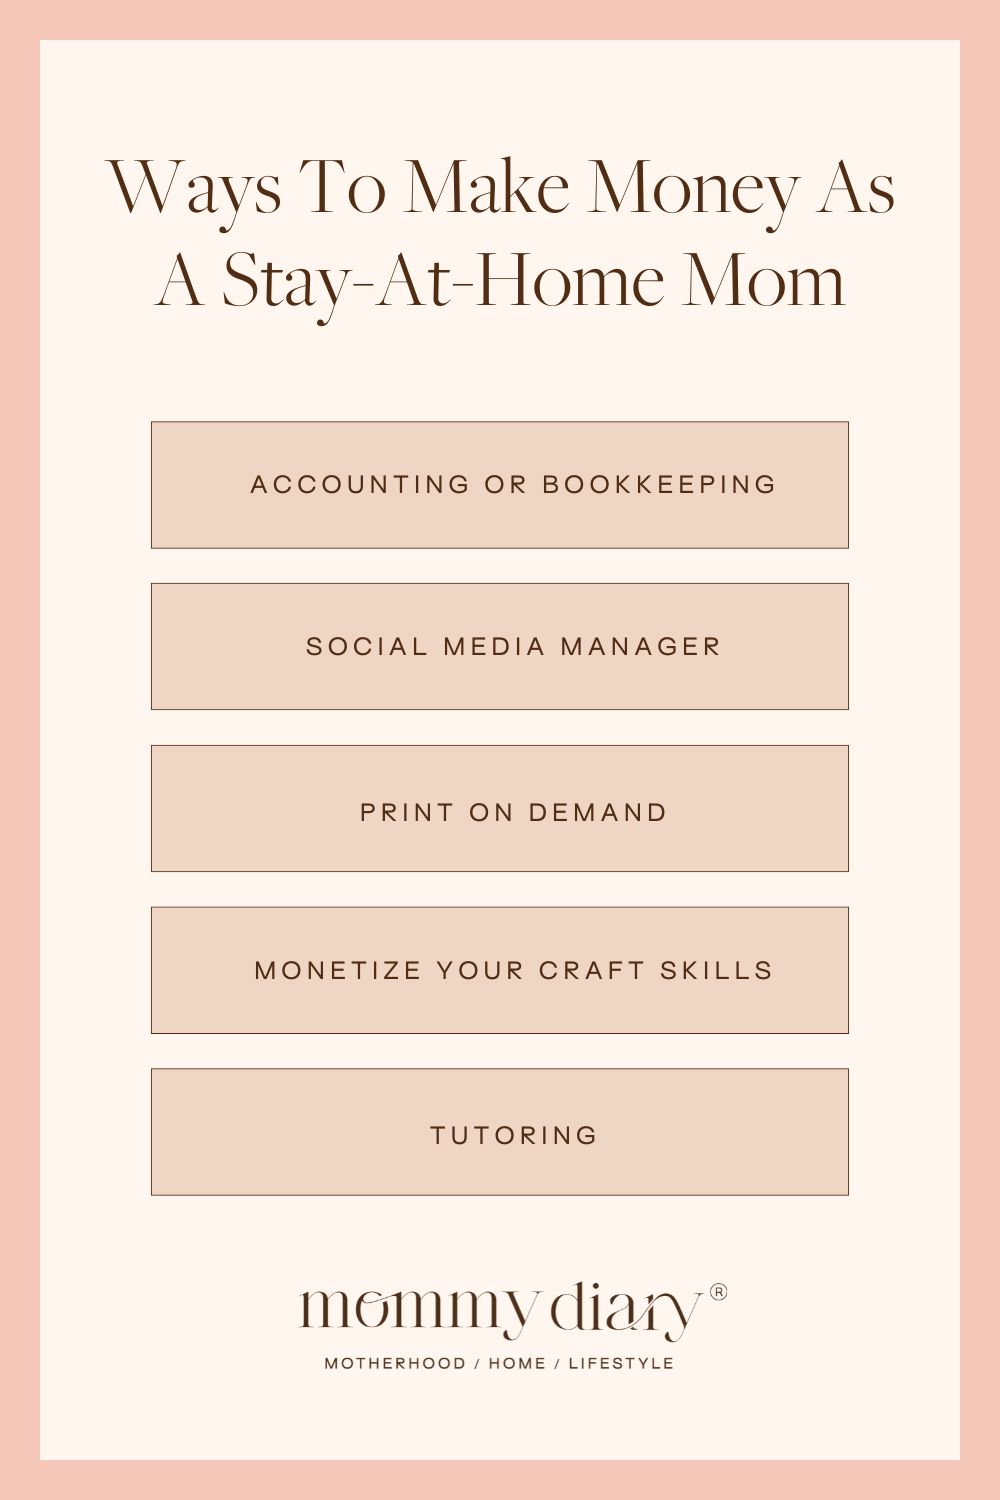 ways to make money as a stay-at-home mom